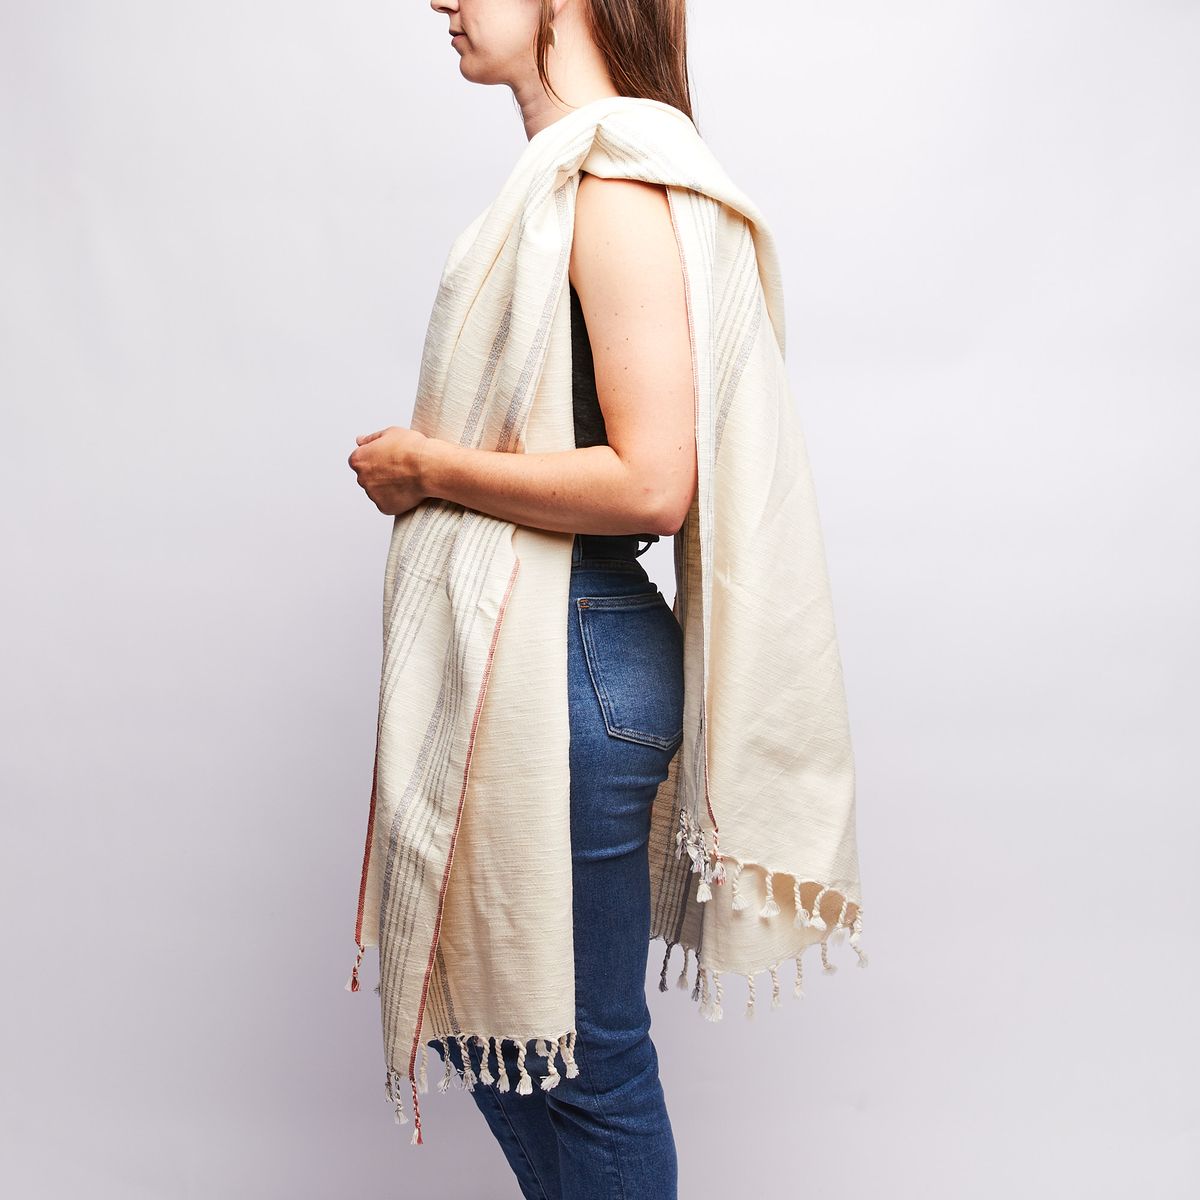 A cream-colored cotton Turkish towel rests over a person's left shoulder